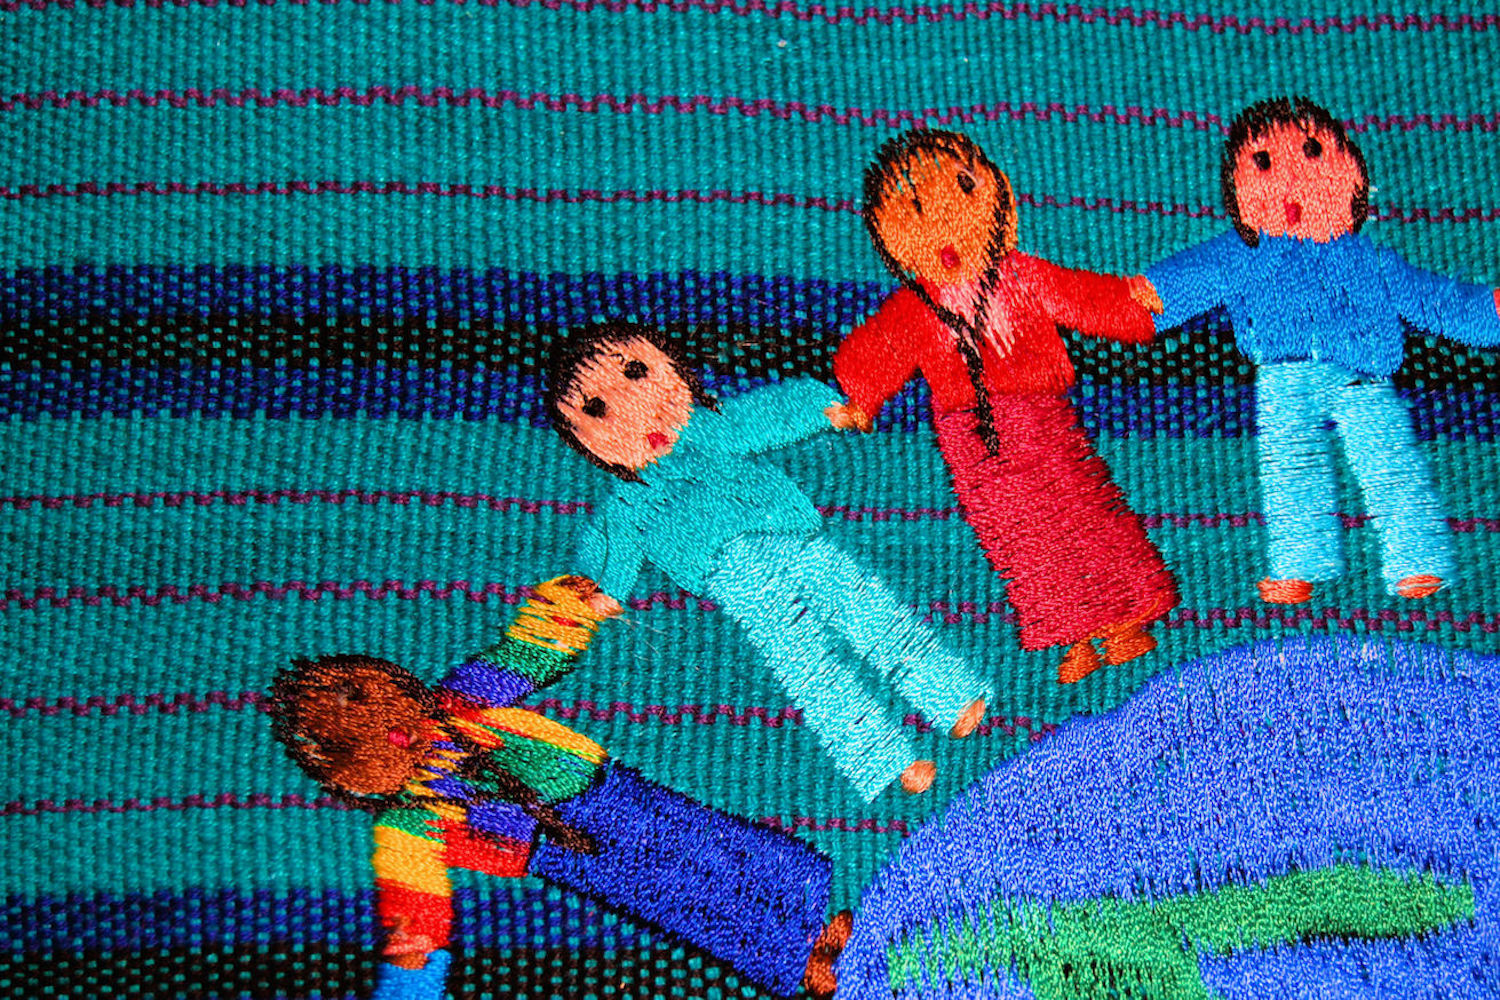 An embroidery of people holding hands